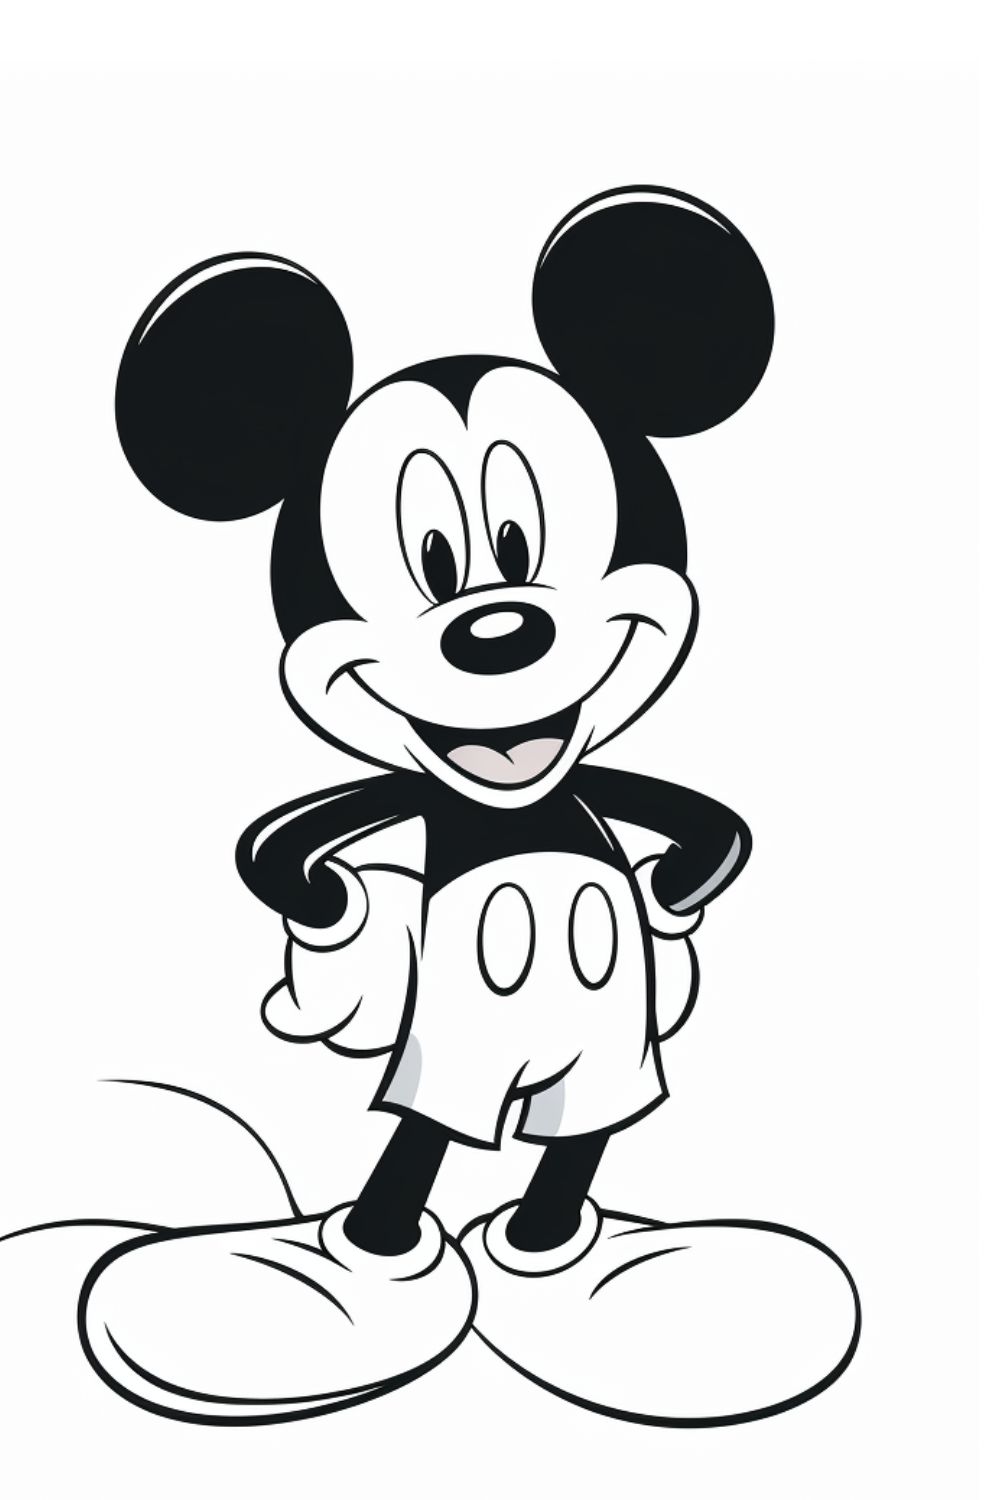 Mickey mouse coloring pages pinterest preview image.